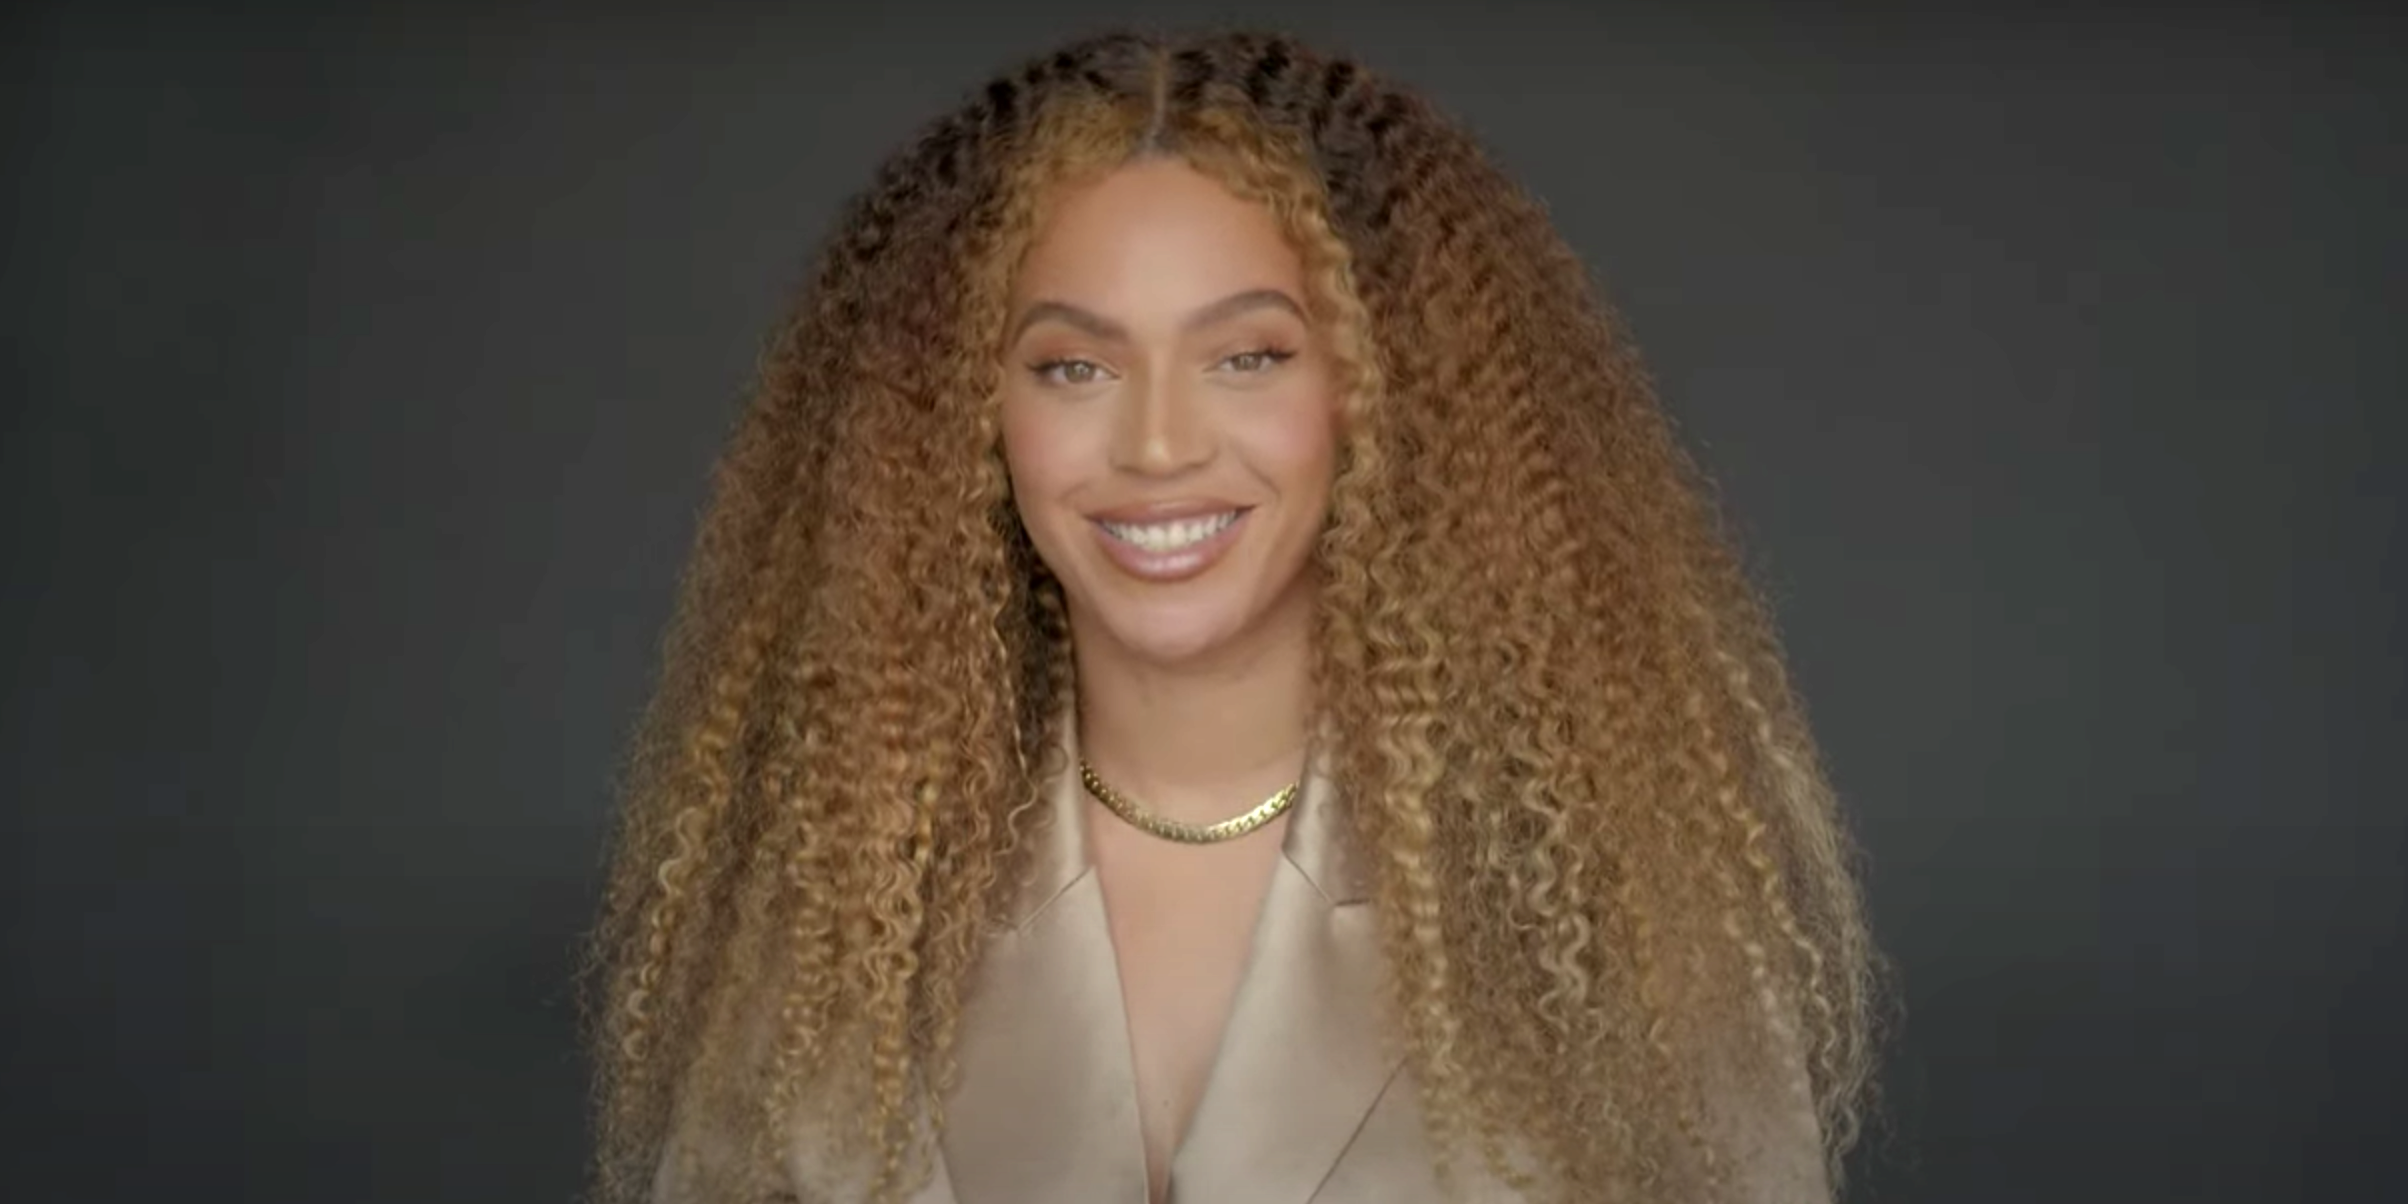 Beyoncé Inspires Class Of 2020 With Powerful Message: ‘Real Change Has Started With You’